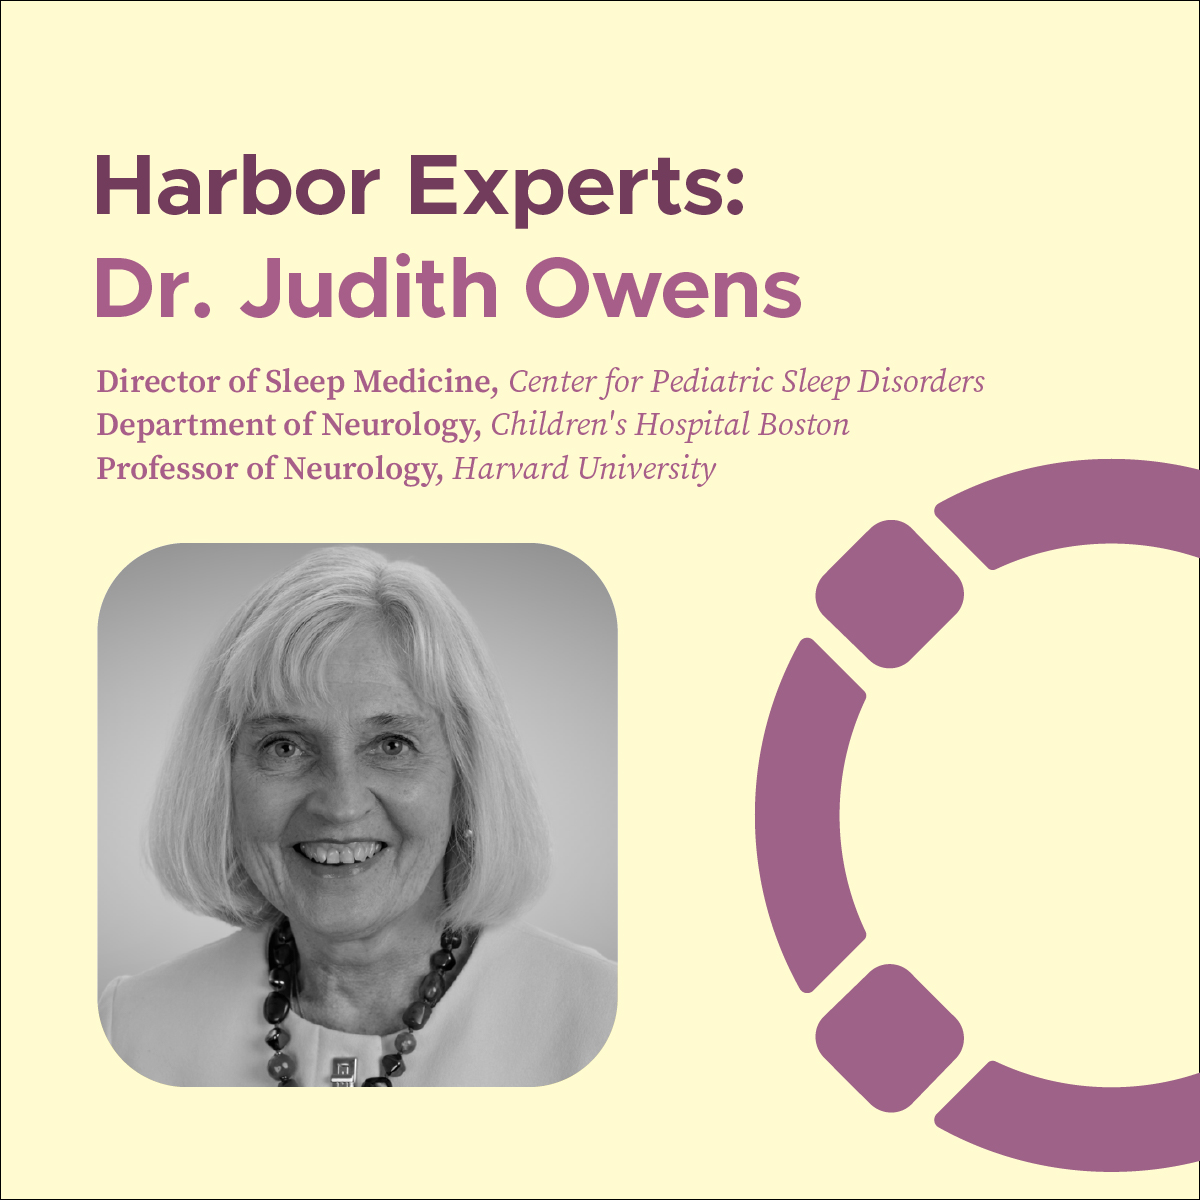 We had the opportunity to speak with renowned Pediatric Sleep Specialist and Pediatrician Dr. Judith Owens on how to balance structure with flexibility centered around your child’s unique needs! Read the article for tips from Dr. Owens. harbor.co/blogs/blog/bal…